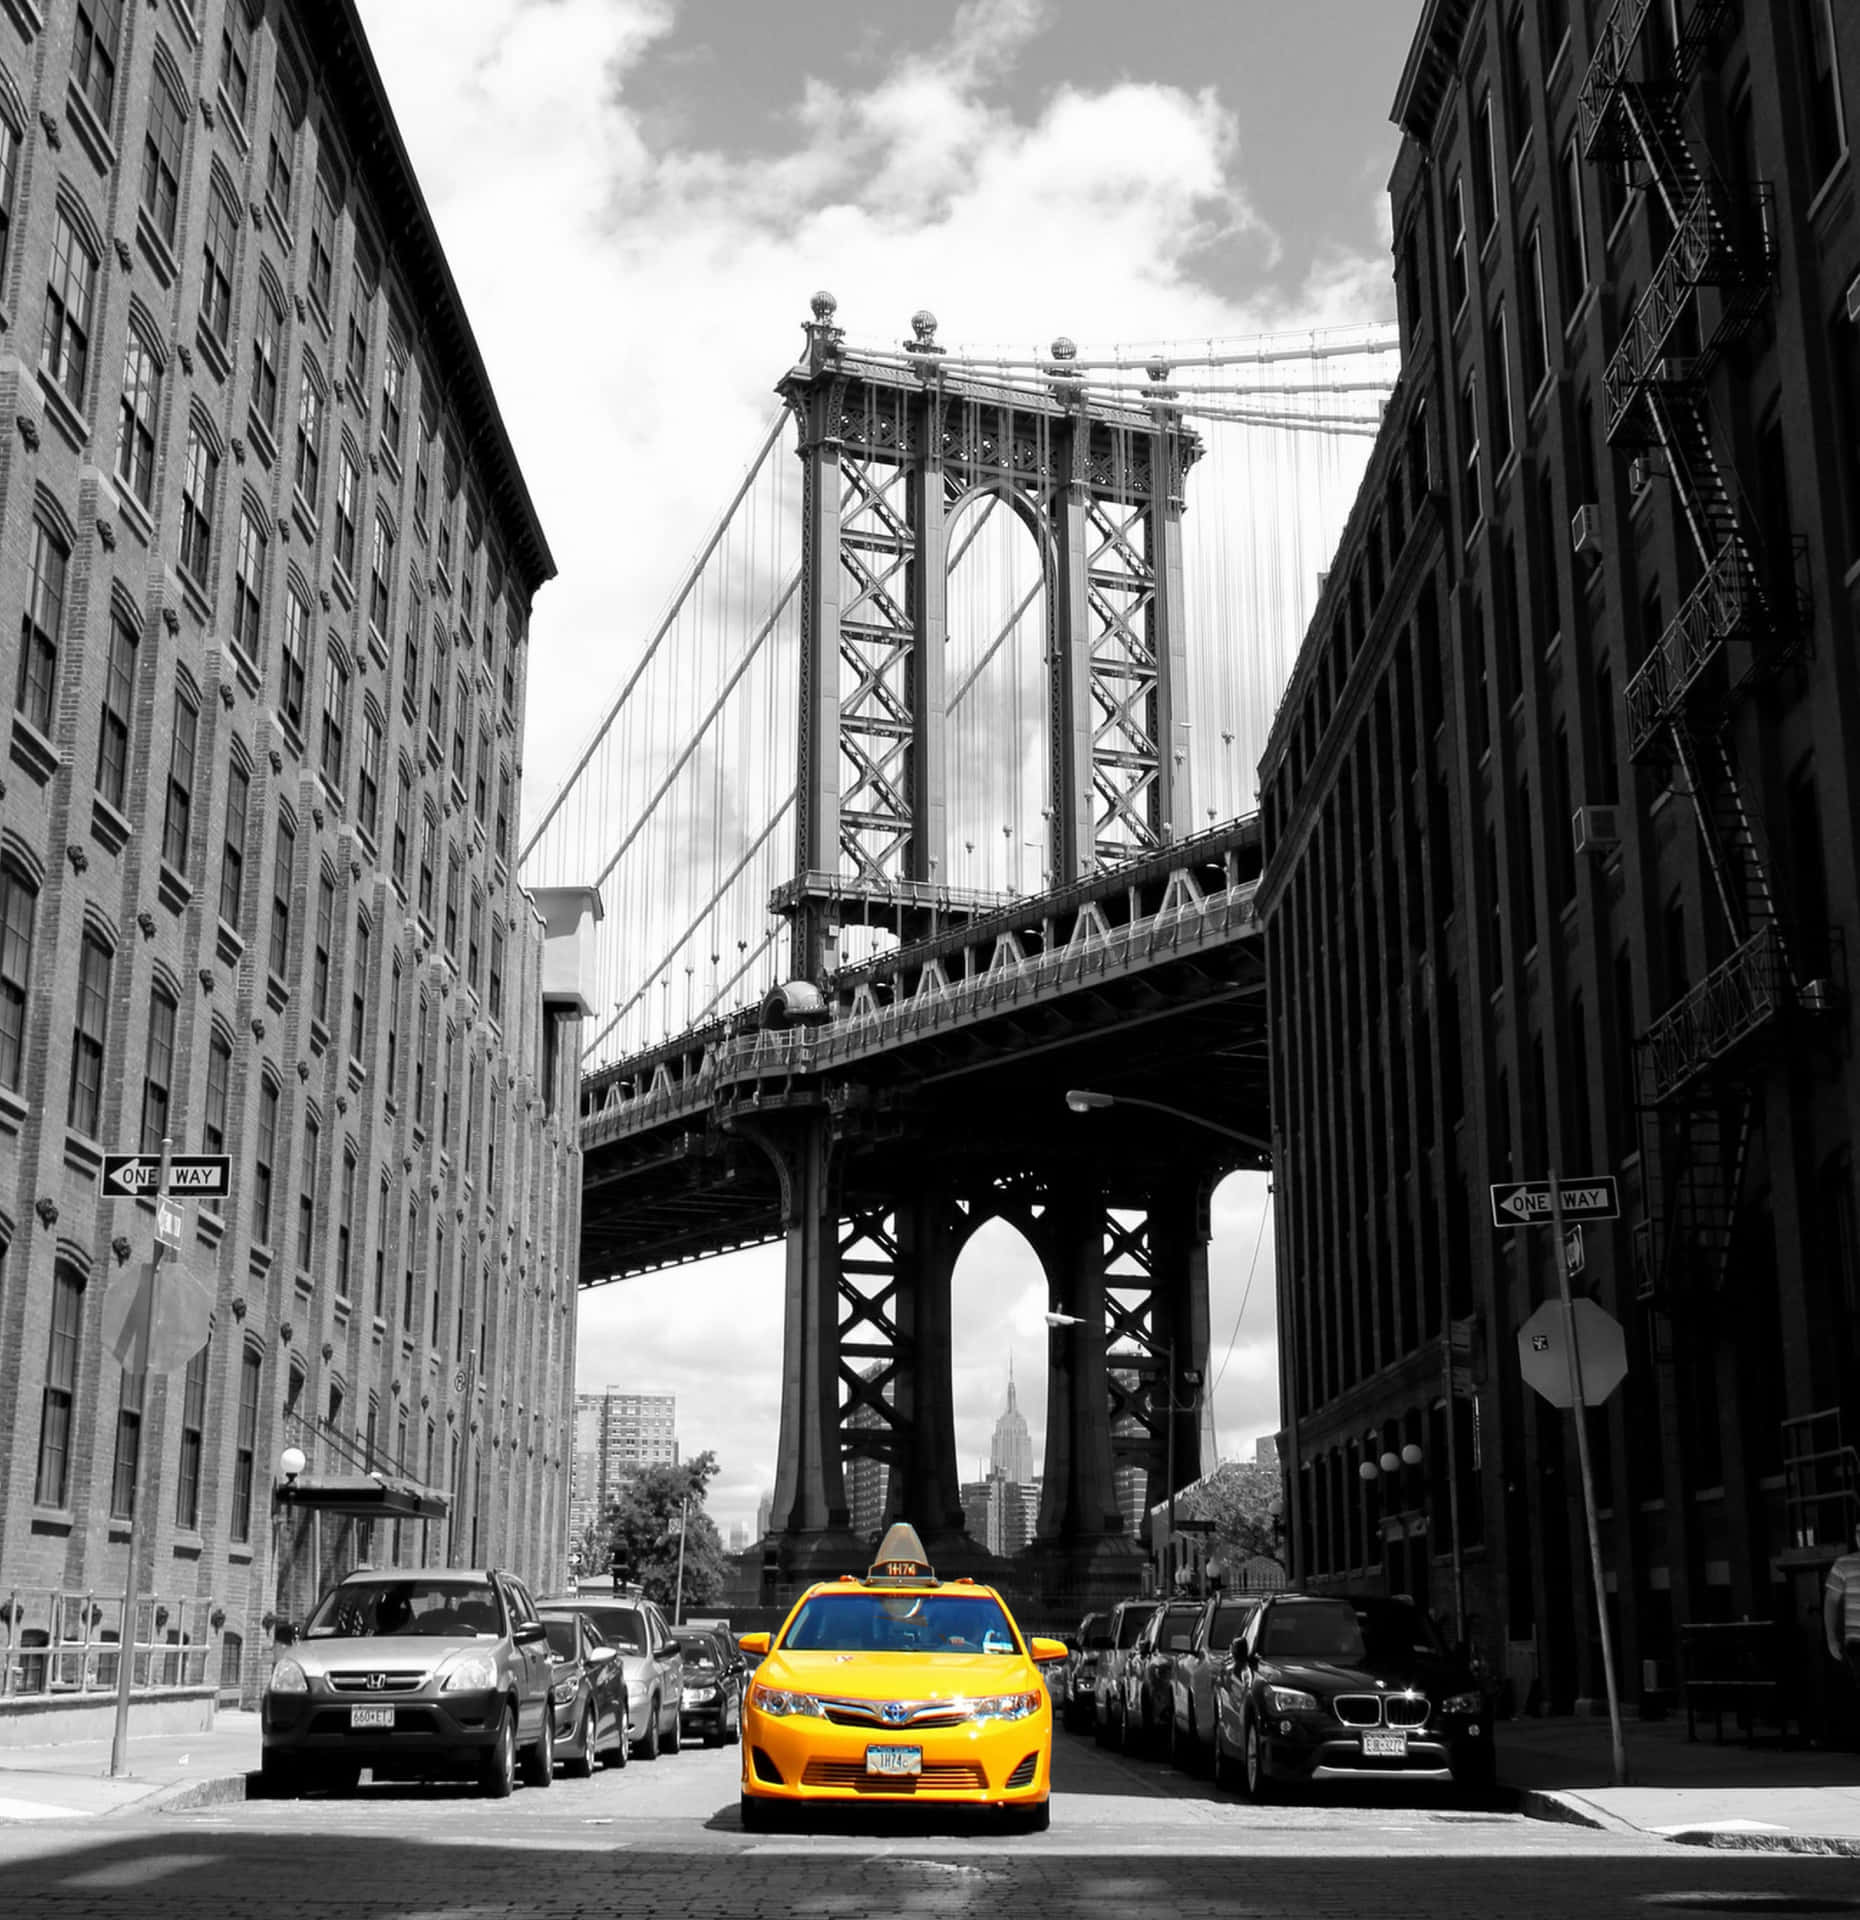 Busy city street with iconic Yellow Cab Wallpaper